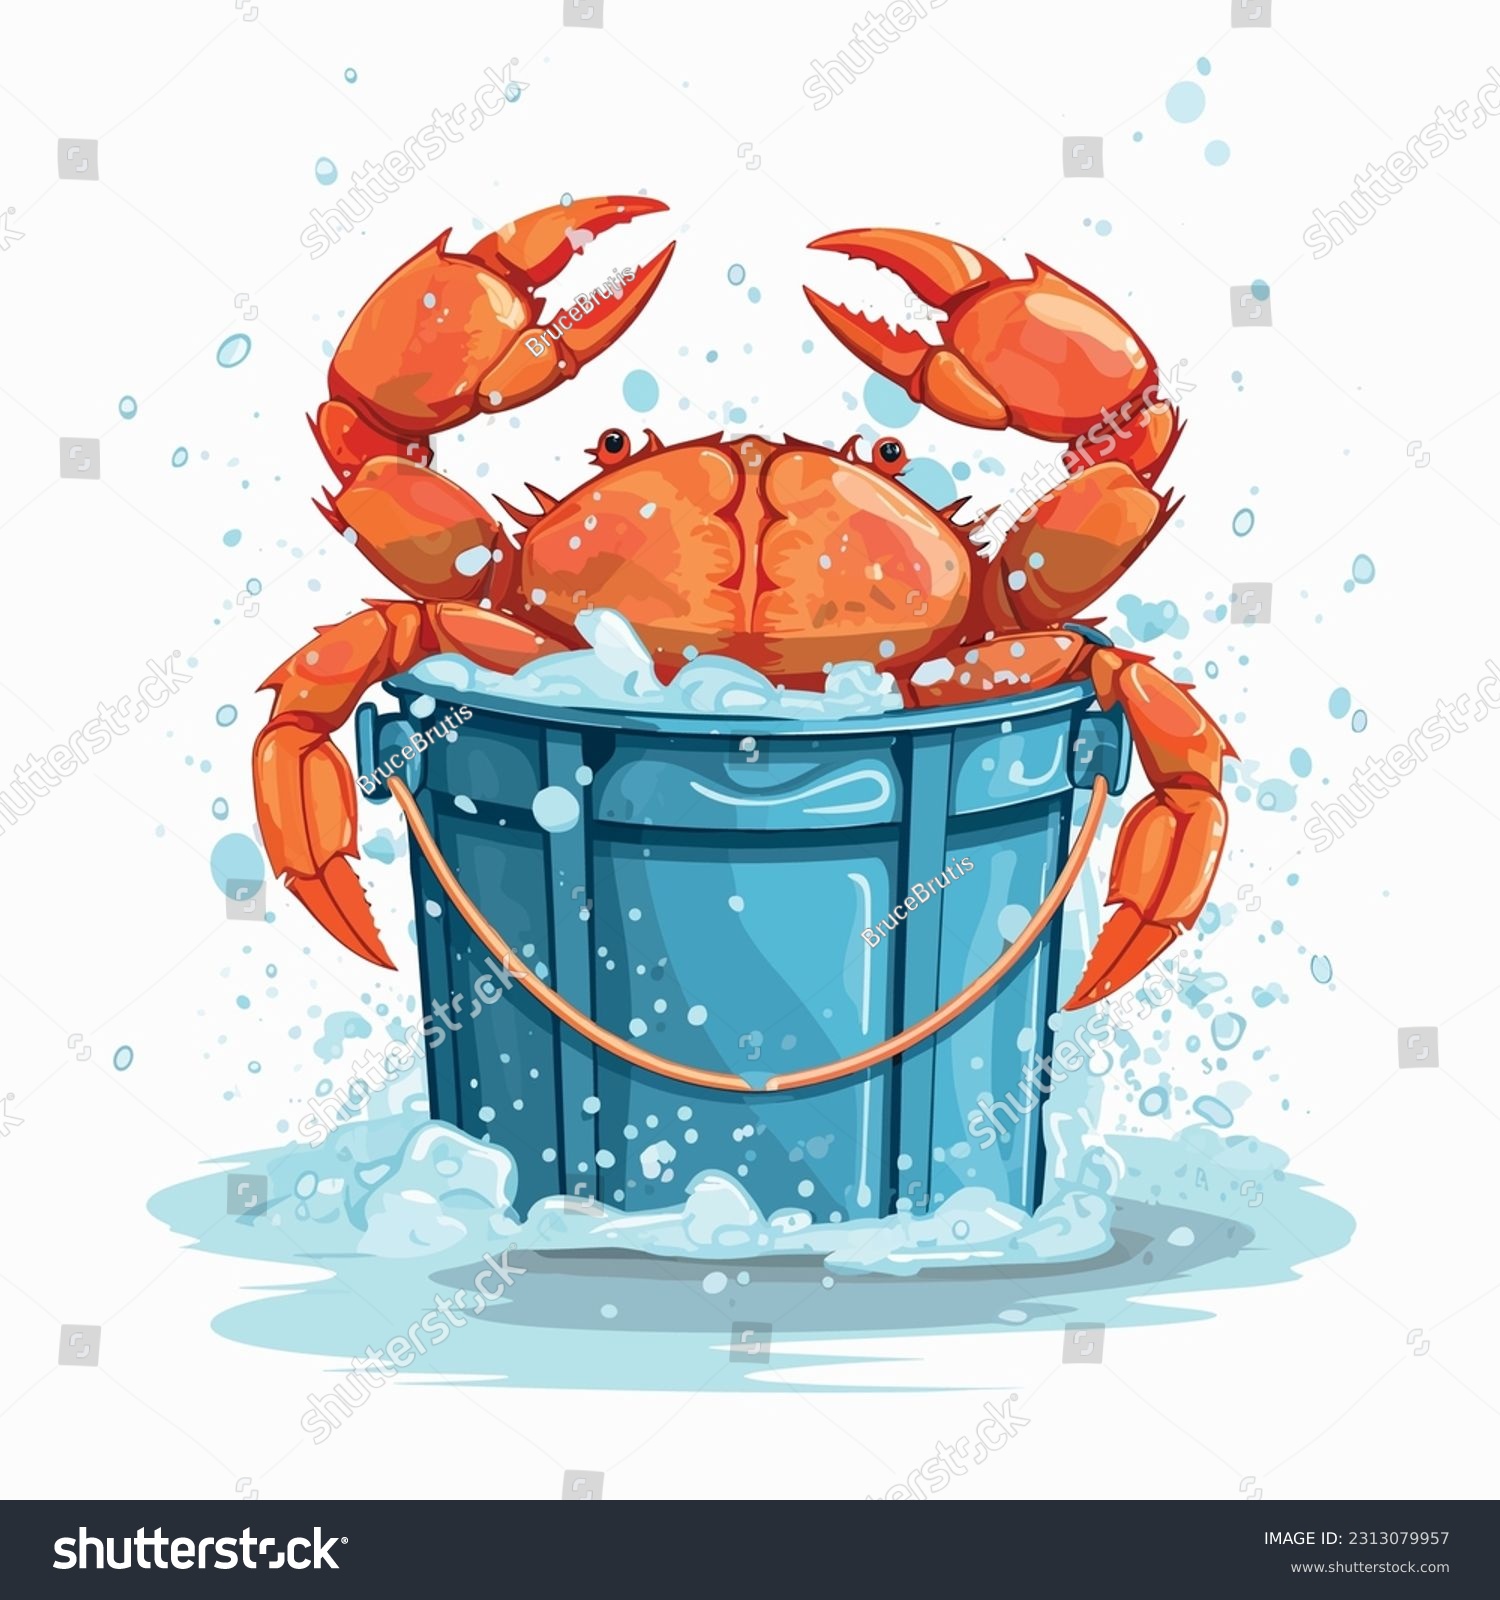 SVG of Scene of a crab bucket in a flat design. Iillustrations of crabs and a bucket svg